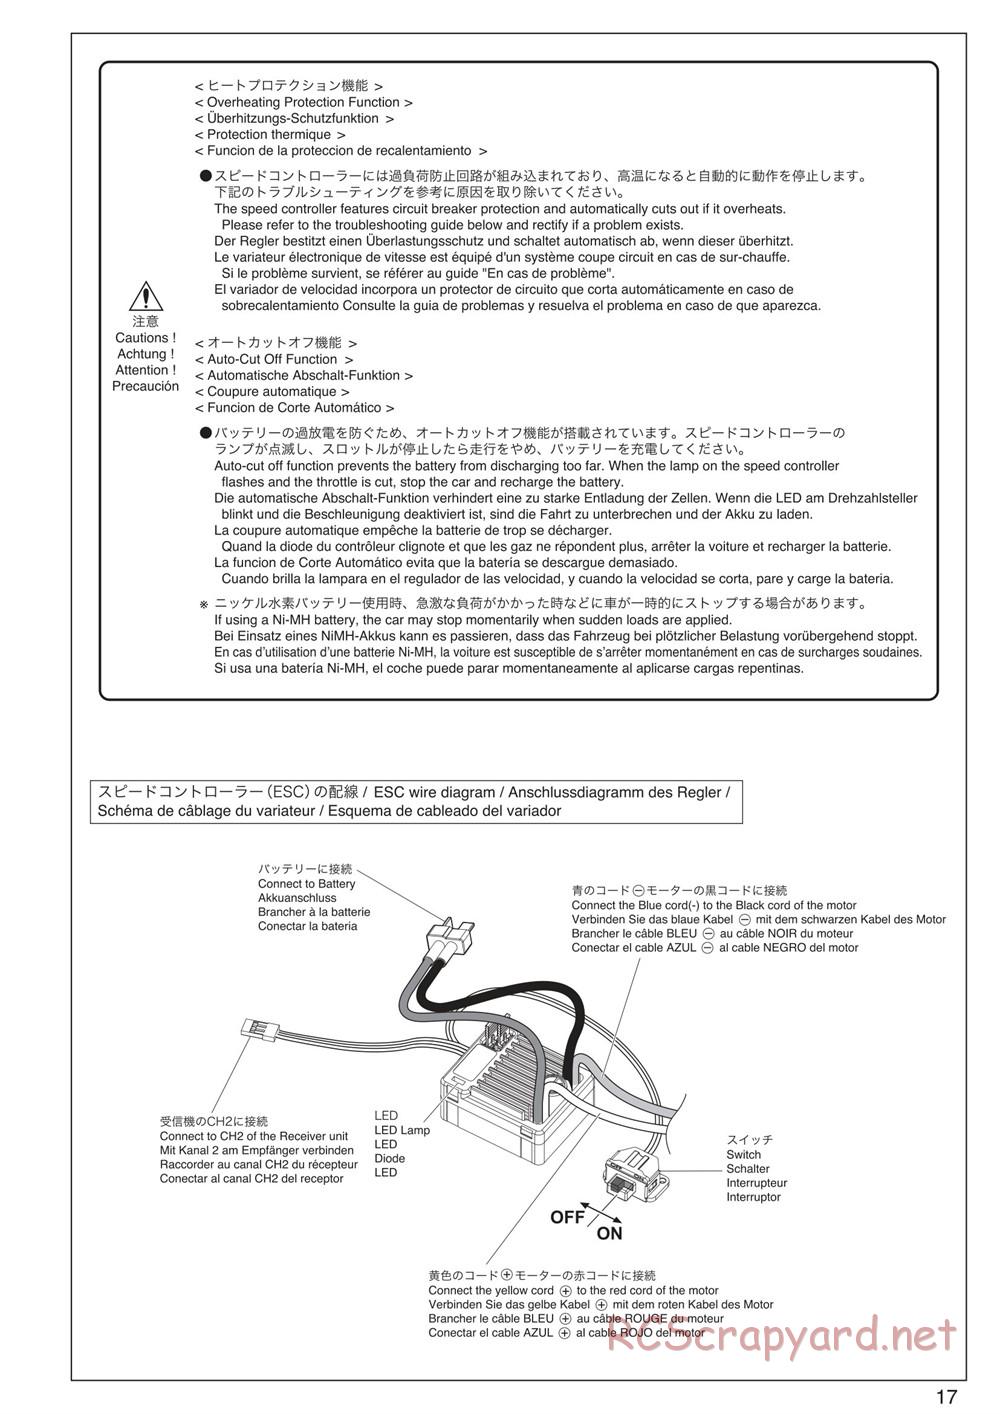 Kyosho - Monster Tracker EP - Manual - Page 17